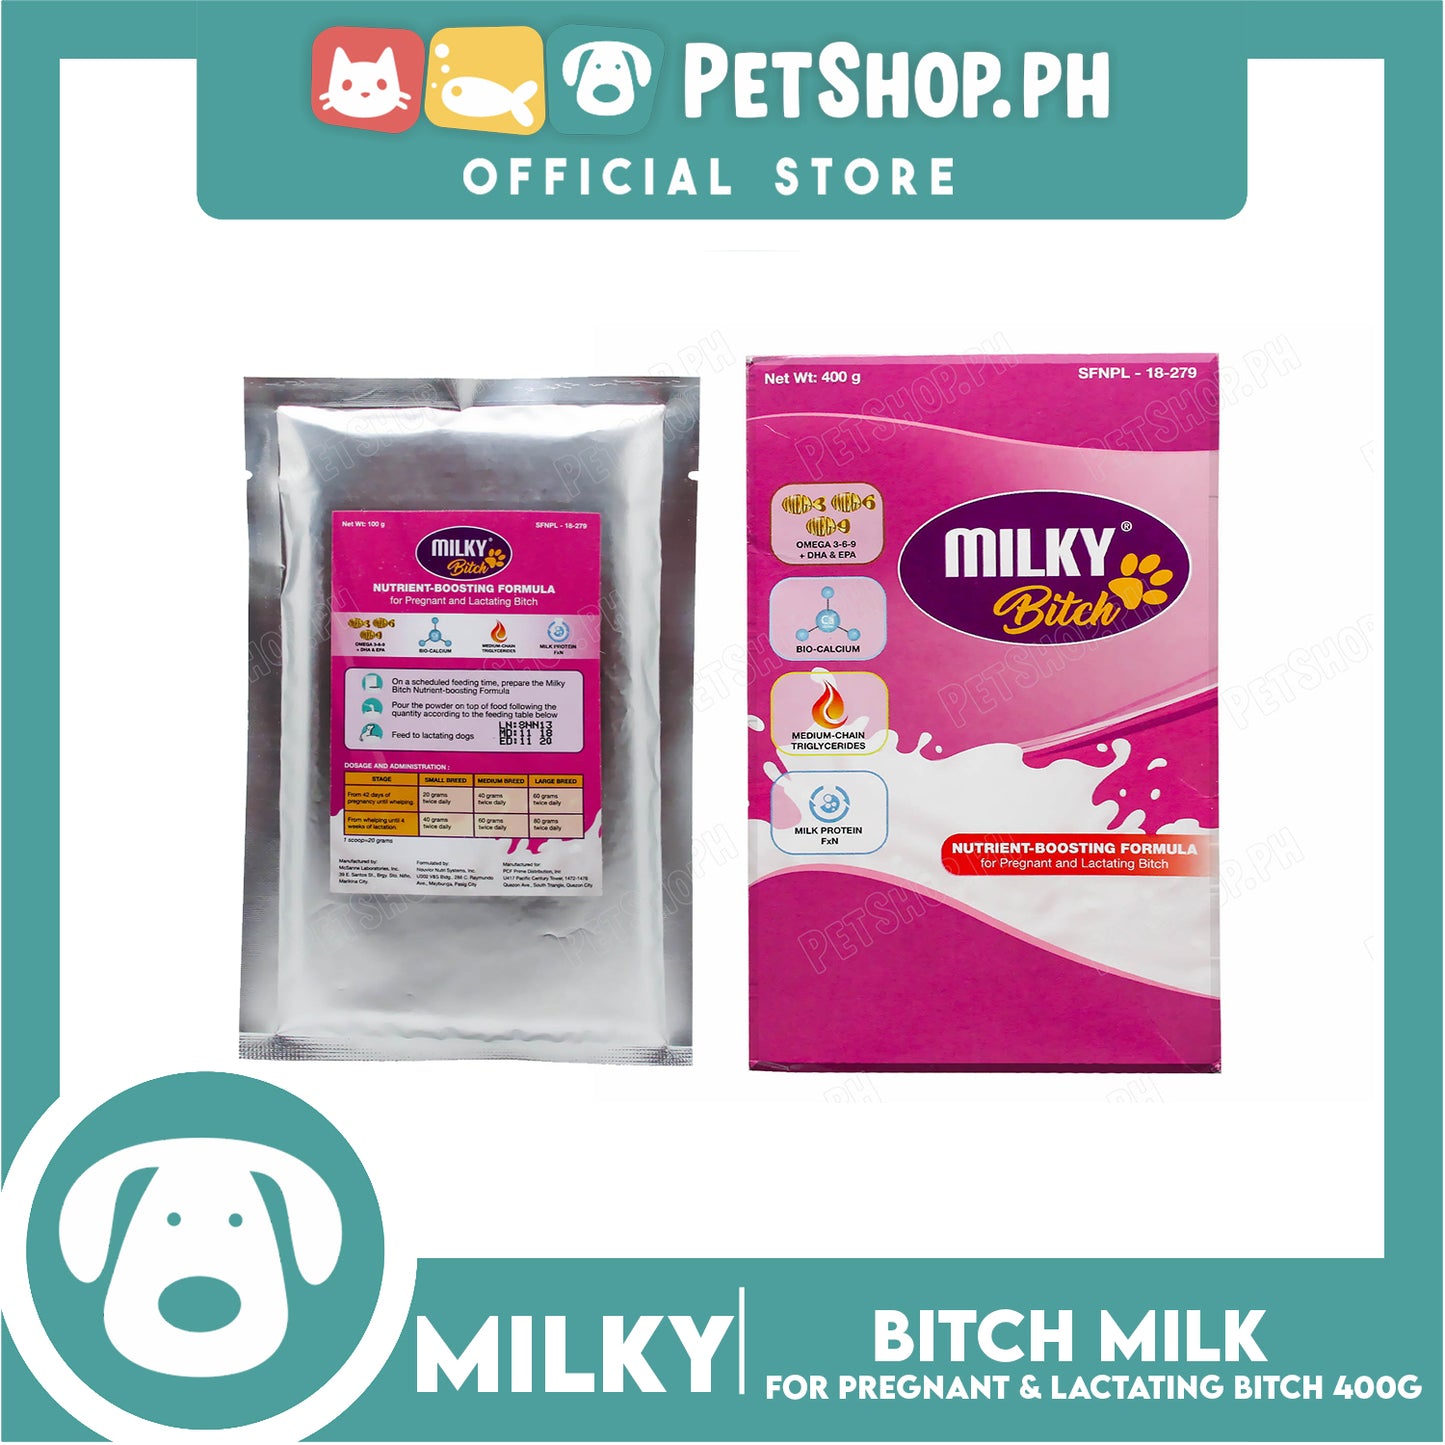 Milk Powder 400g with Nutrient Boosting Formula for Pregnant and Lactating Dogs